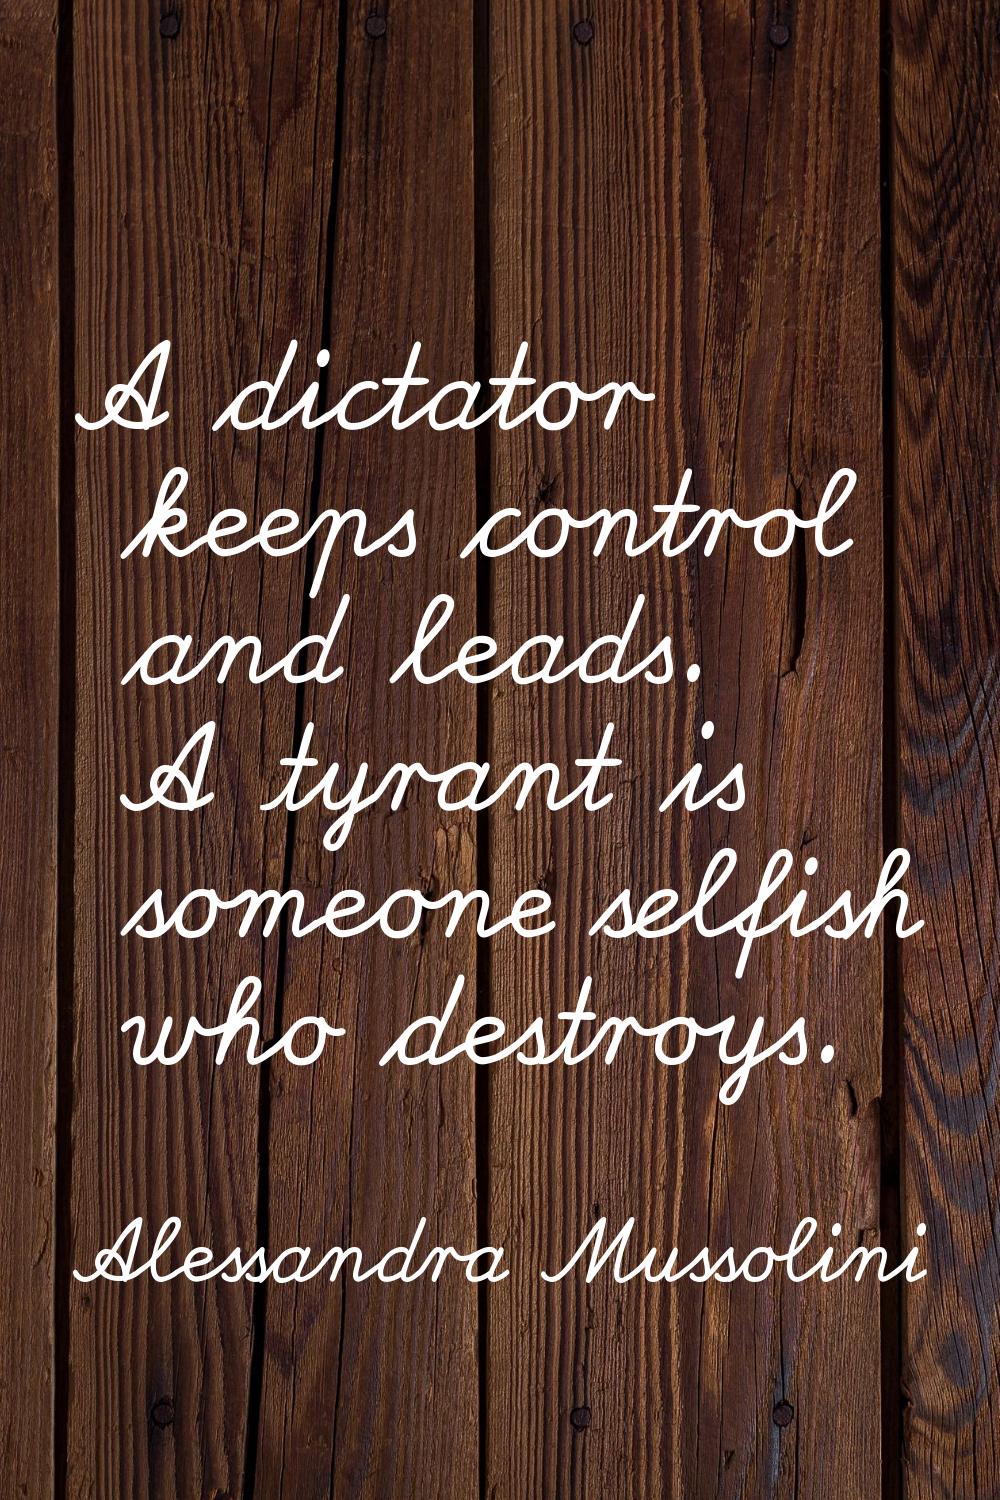 A dictator keeps control and leads. A tyrant is someone selfish who destroys.